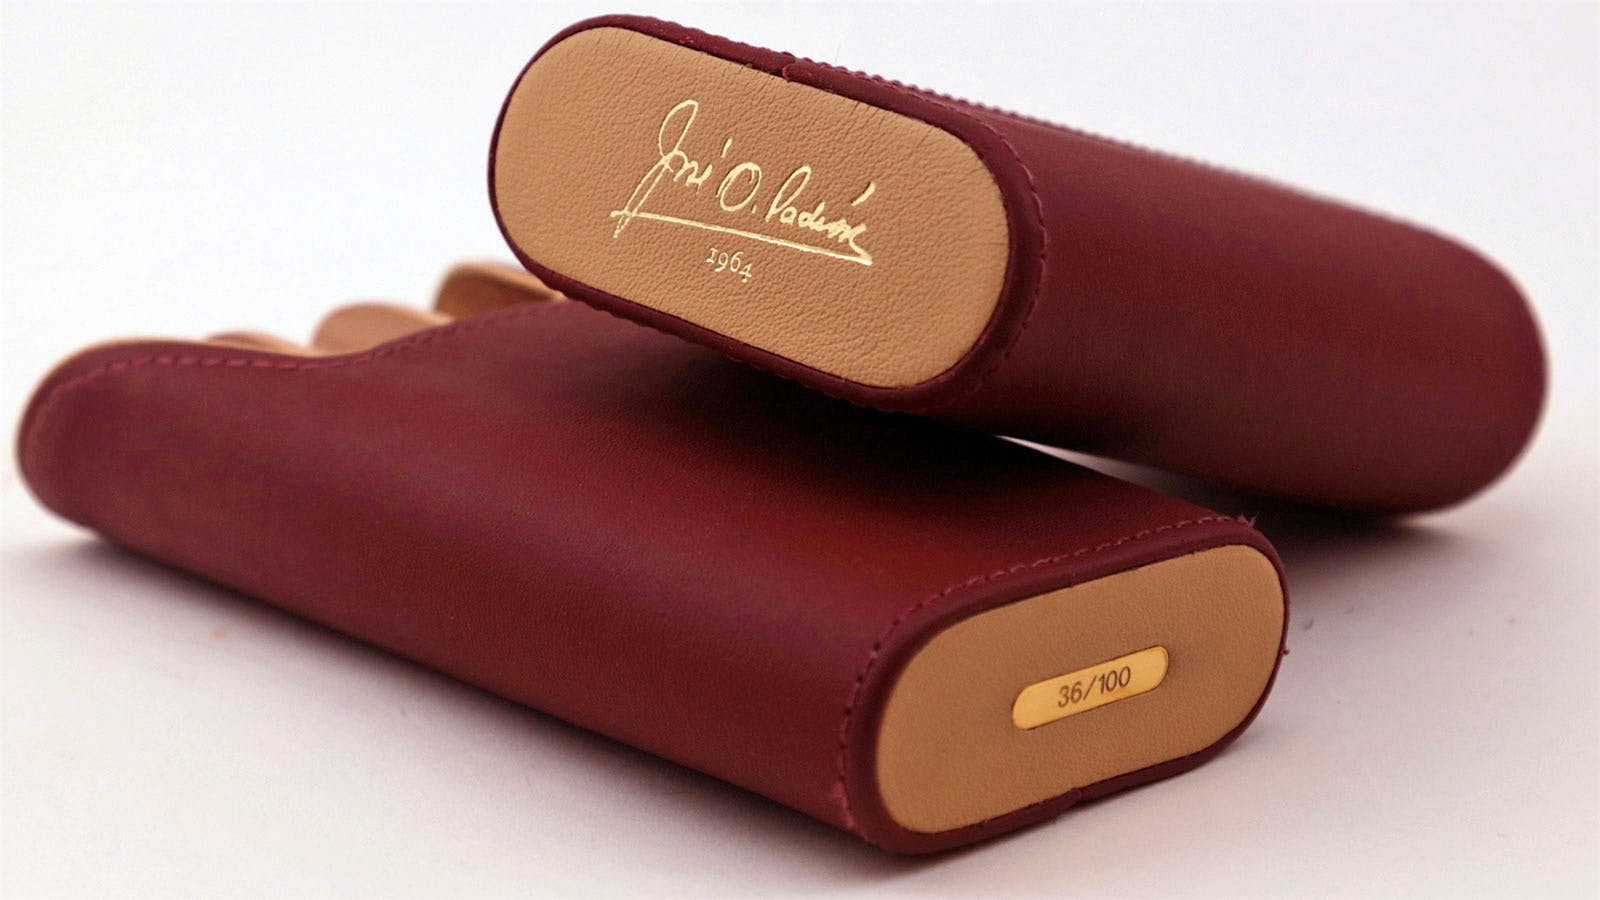 For Padrón, Brizard has crafted a burgundy leather cigar case called The Little Hammer.